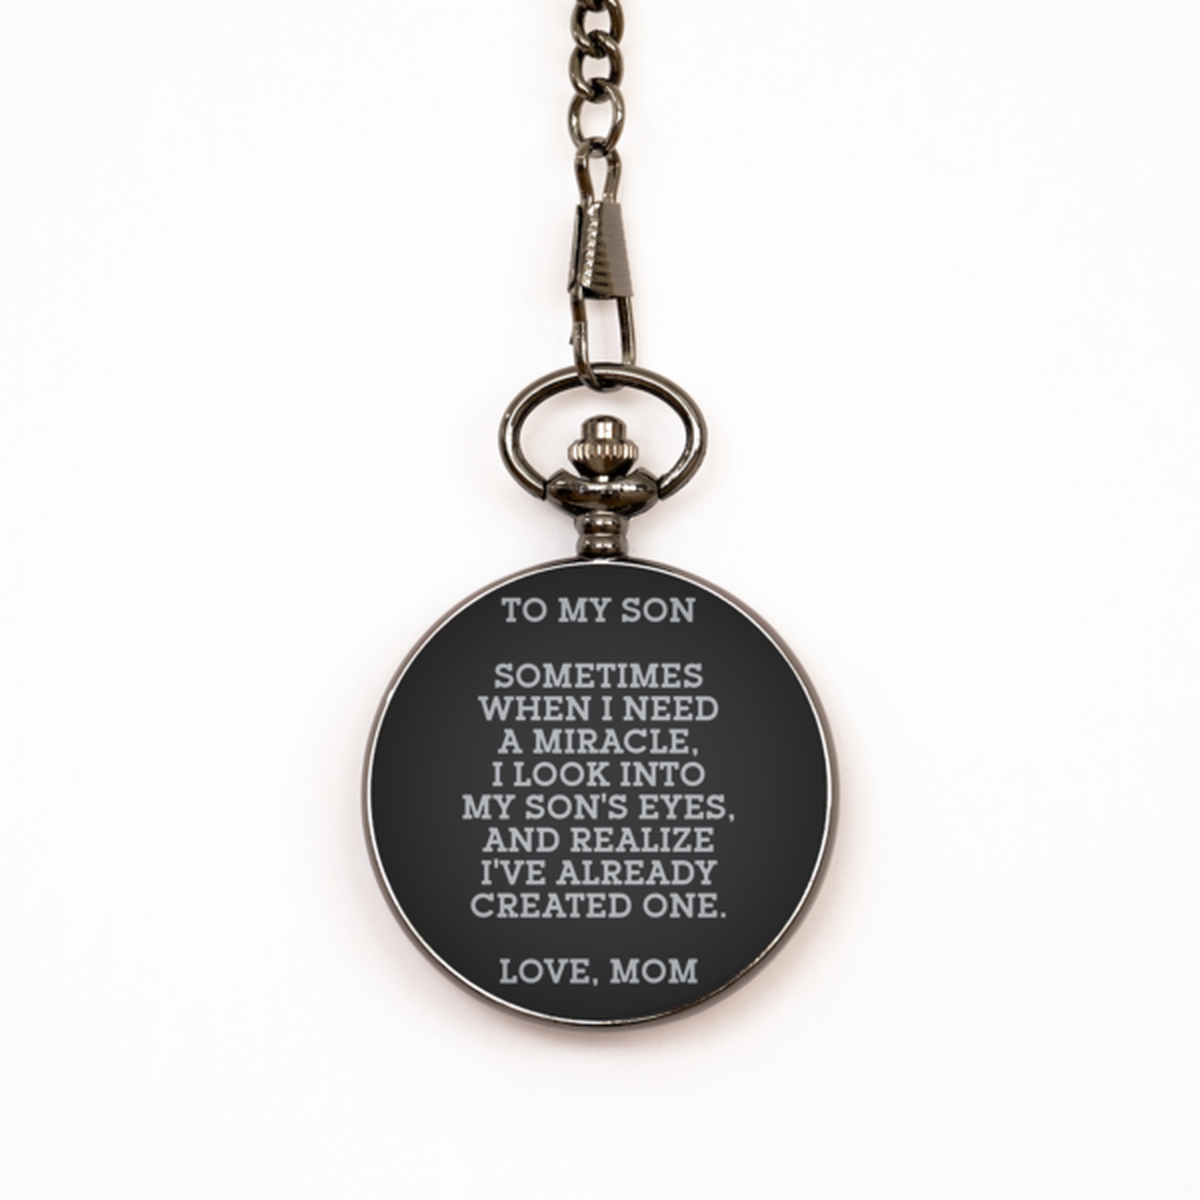 To My Son Black Pocket Watch, Sometimes When I Need A Miracle, Graduation Day Gifts For Son From Mom, Birthday Gifts For Men